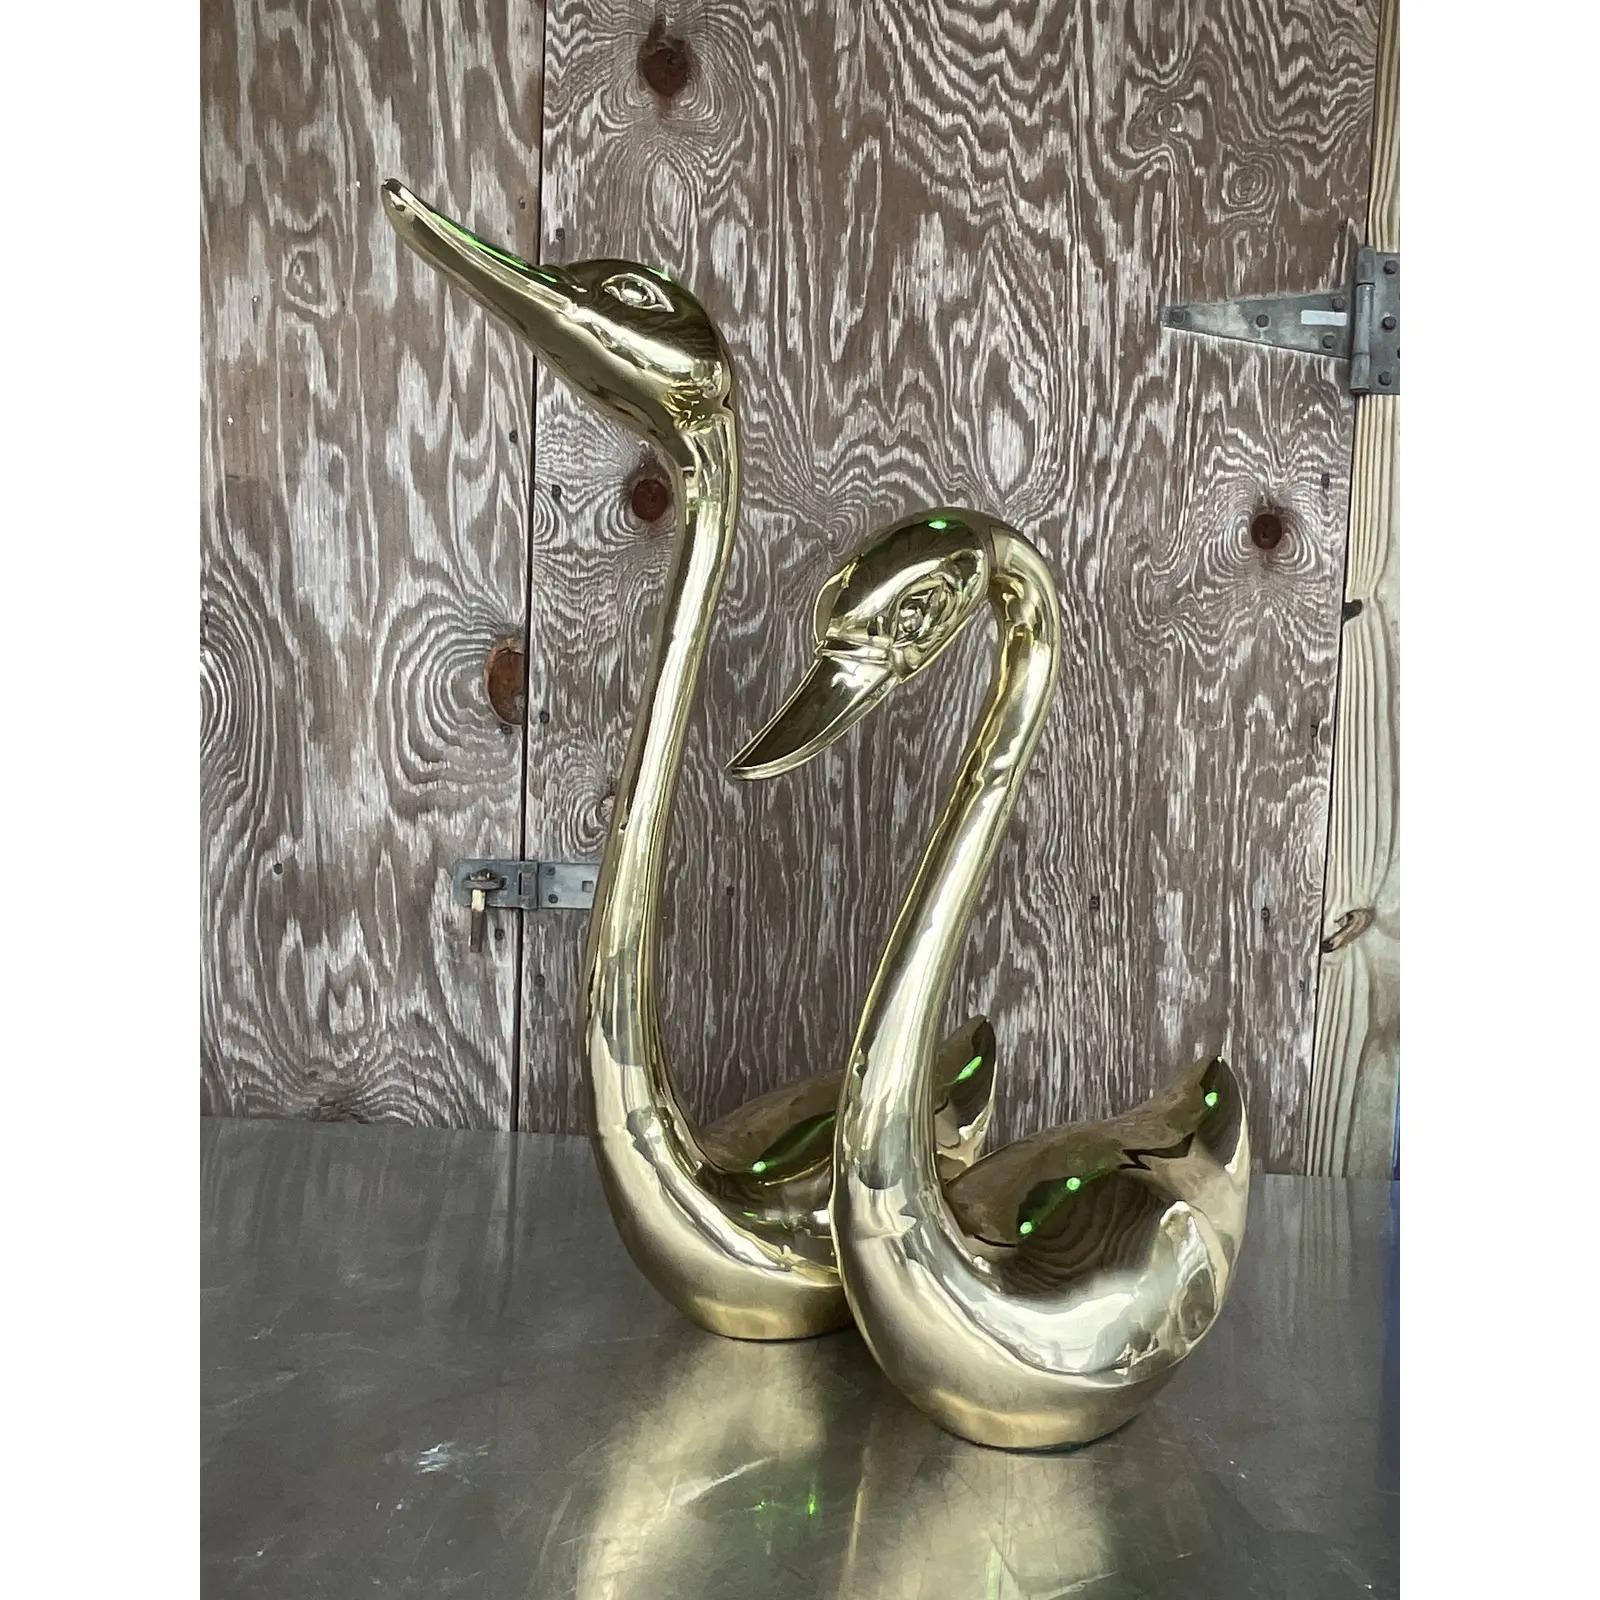 Vintage pair of vintage Regency brass swans. Beautiful long necks in a clean design. Acquired from a Palm Beach estate. 

Taller swan dimensions 20x7.5x27.25.